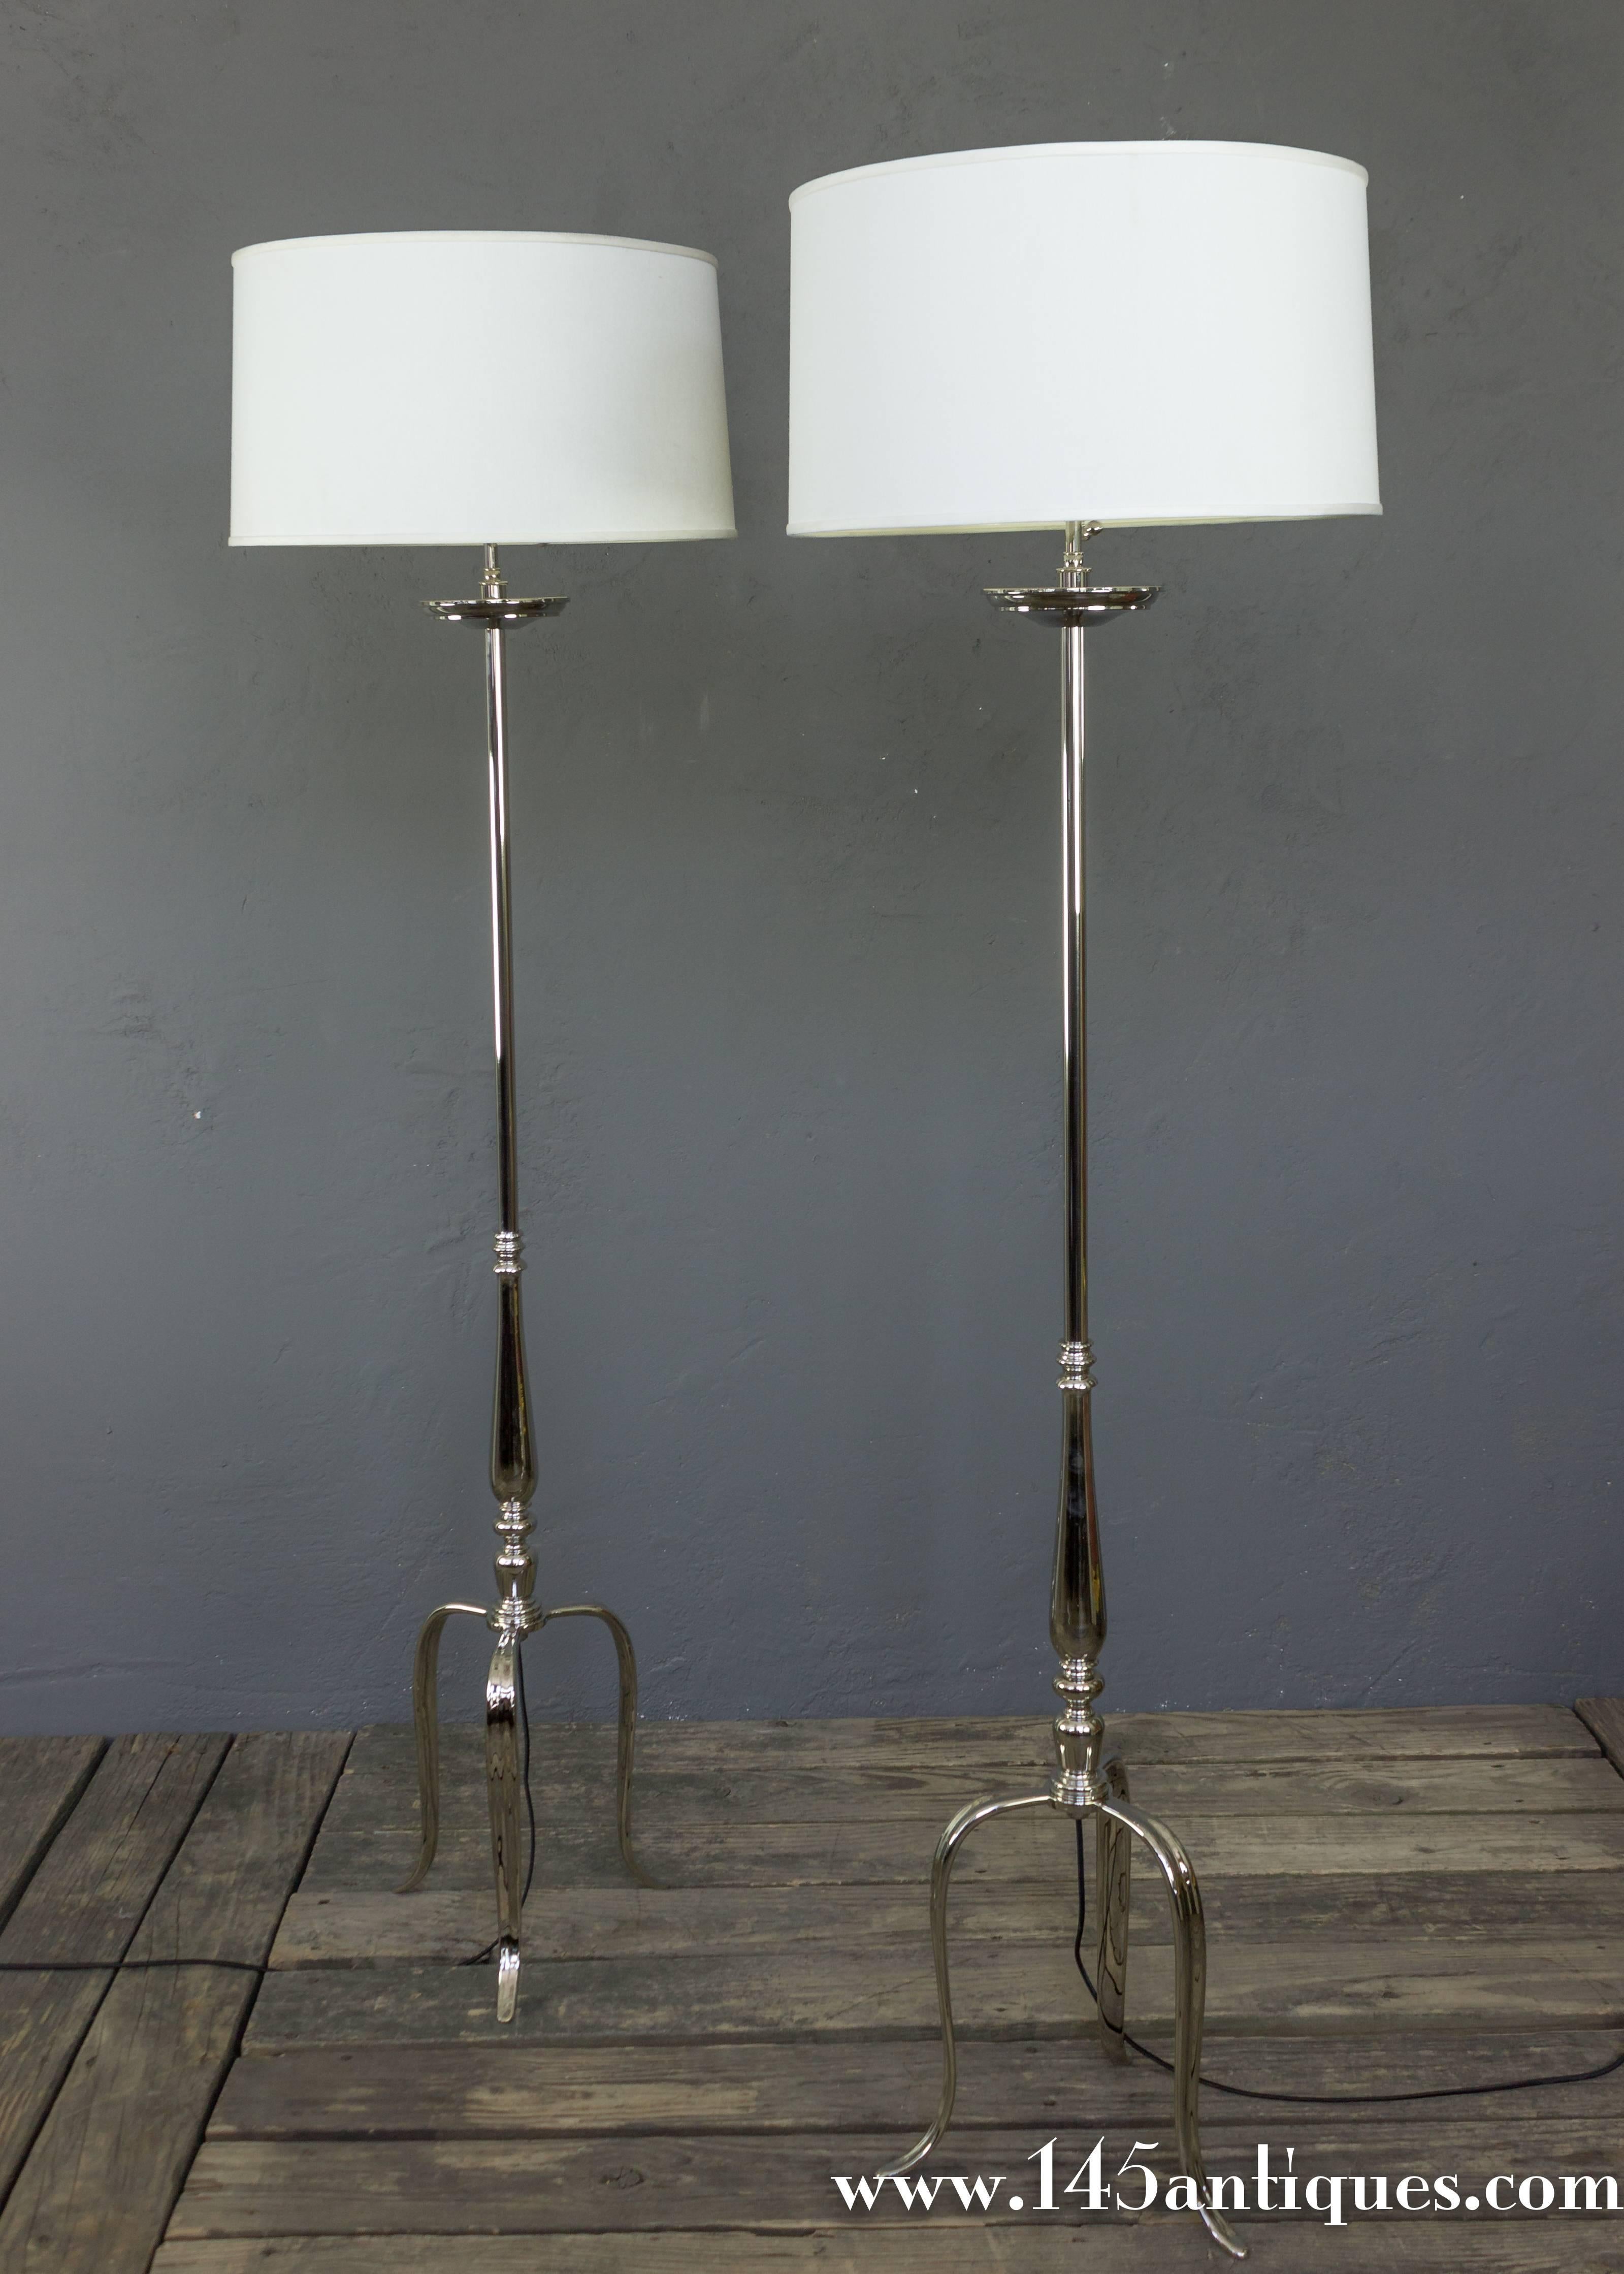 Very elegant pair turned and cast brass floor lamps on a tripod base. Recently plated in a polished nickel. New wiring, not UL code.